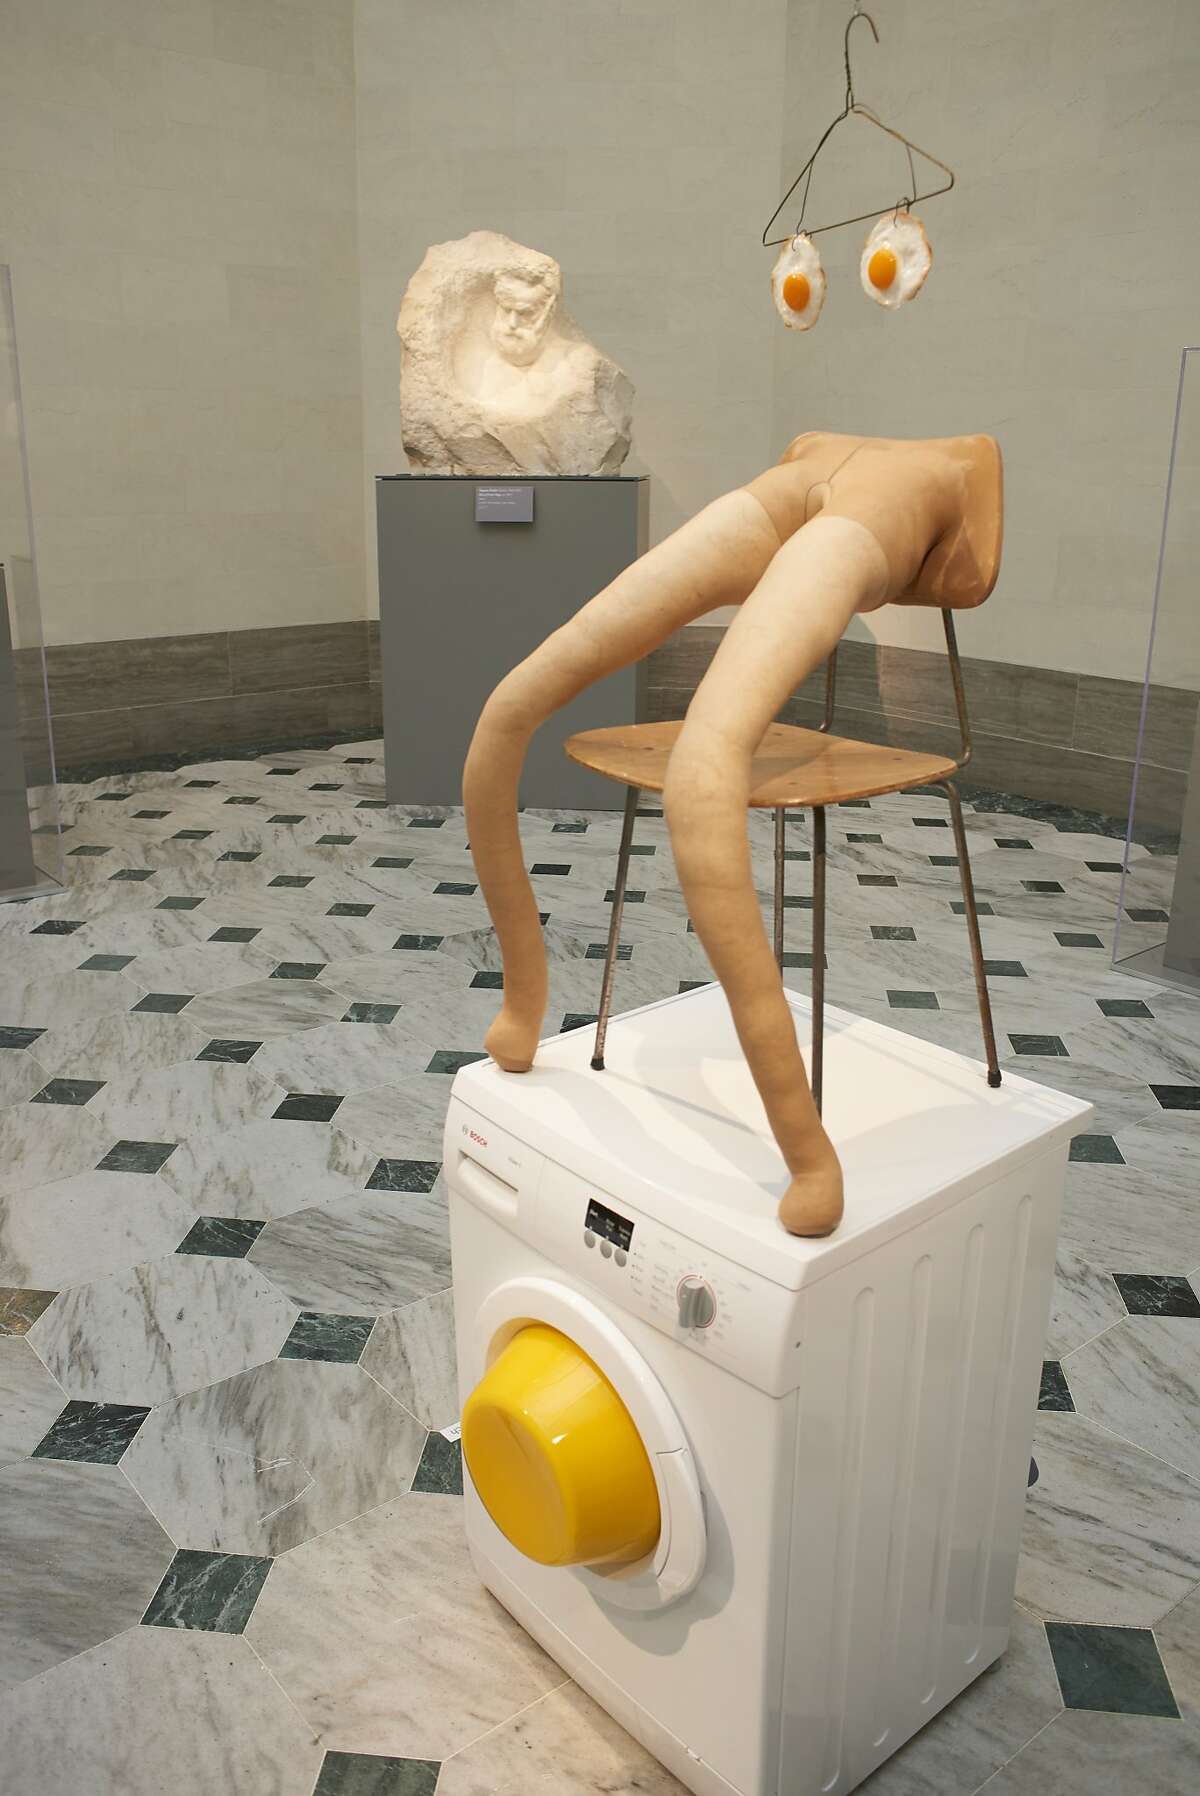 Sarah Lucas's "Washing Machine Fried Egg" (2017) is installed in the Rodin galleries at the Legion of Honor through Sept. 17.